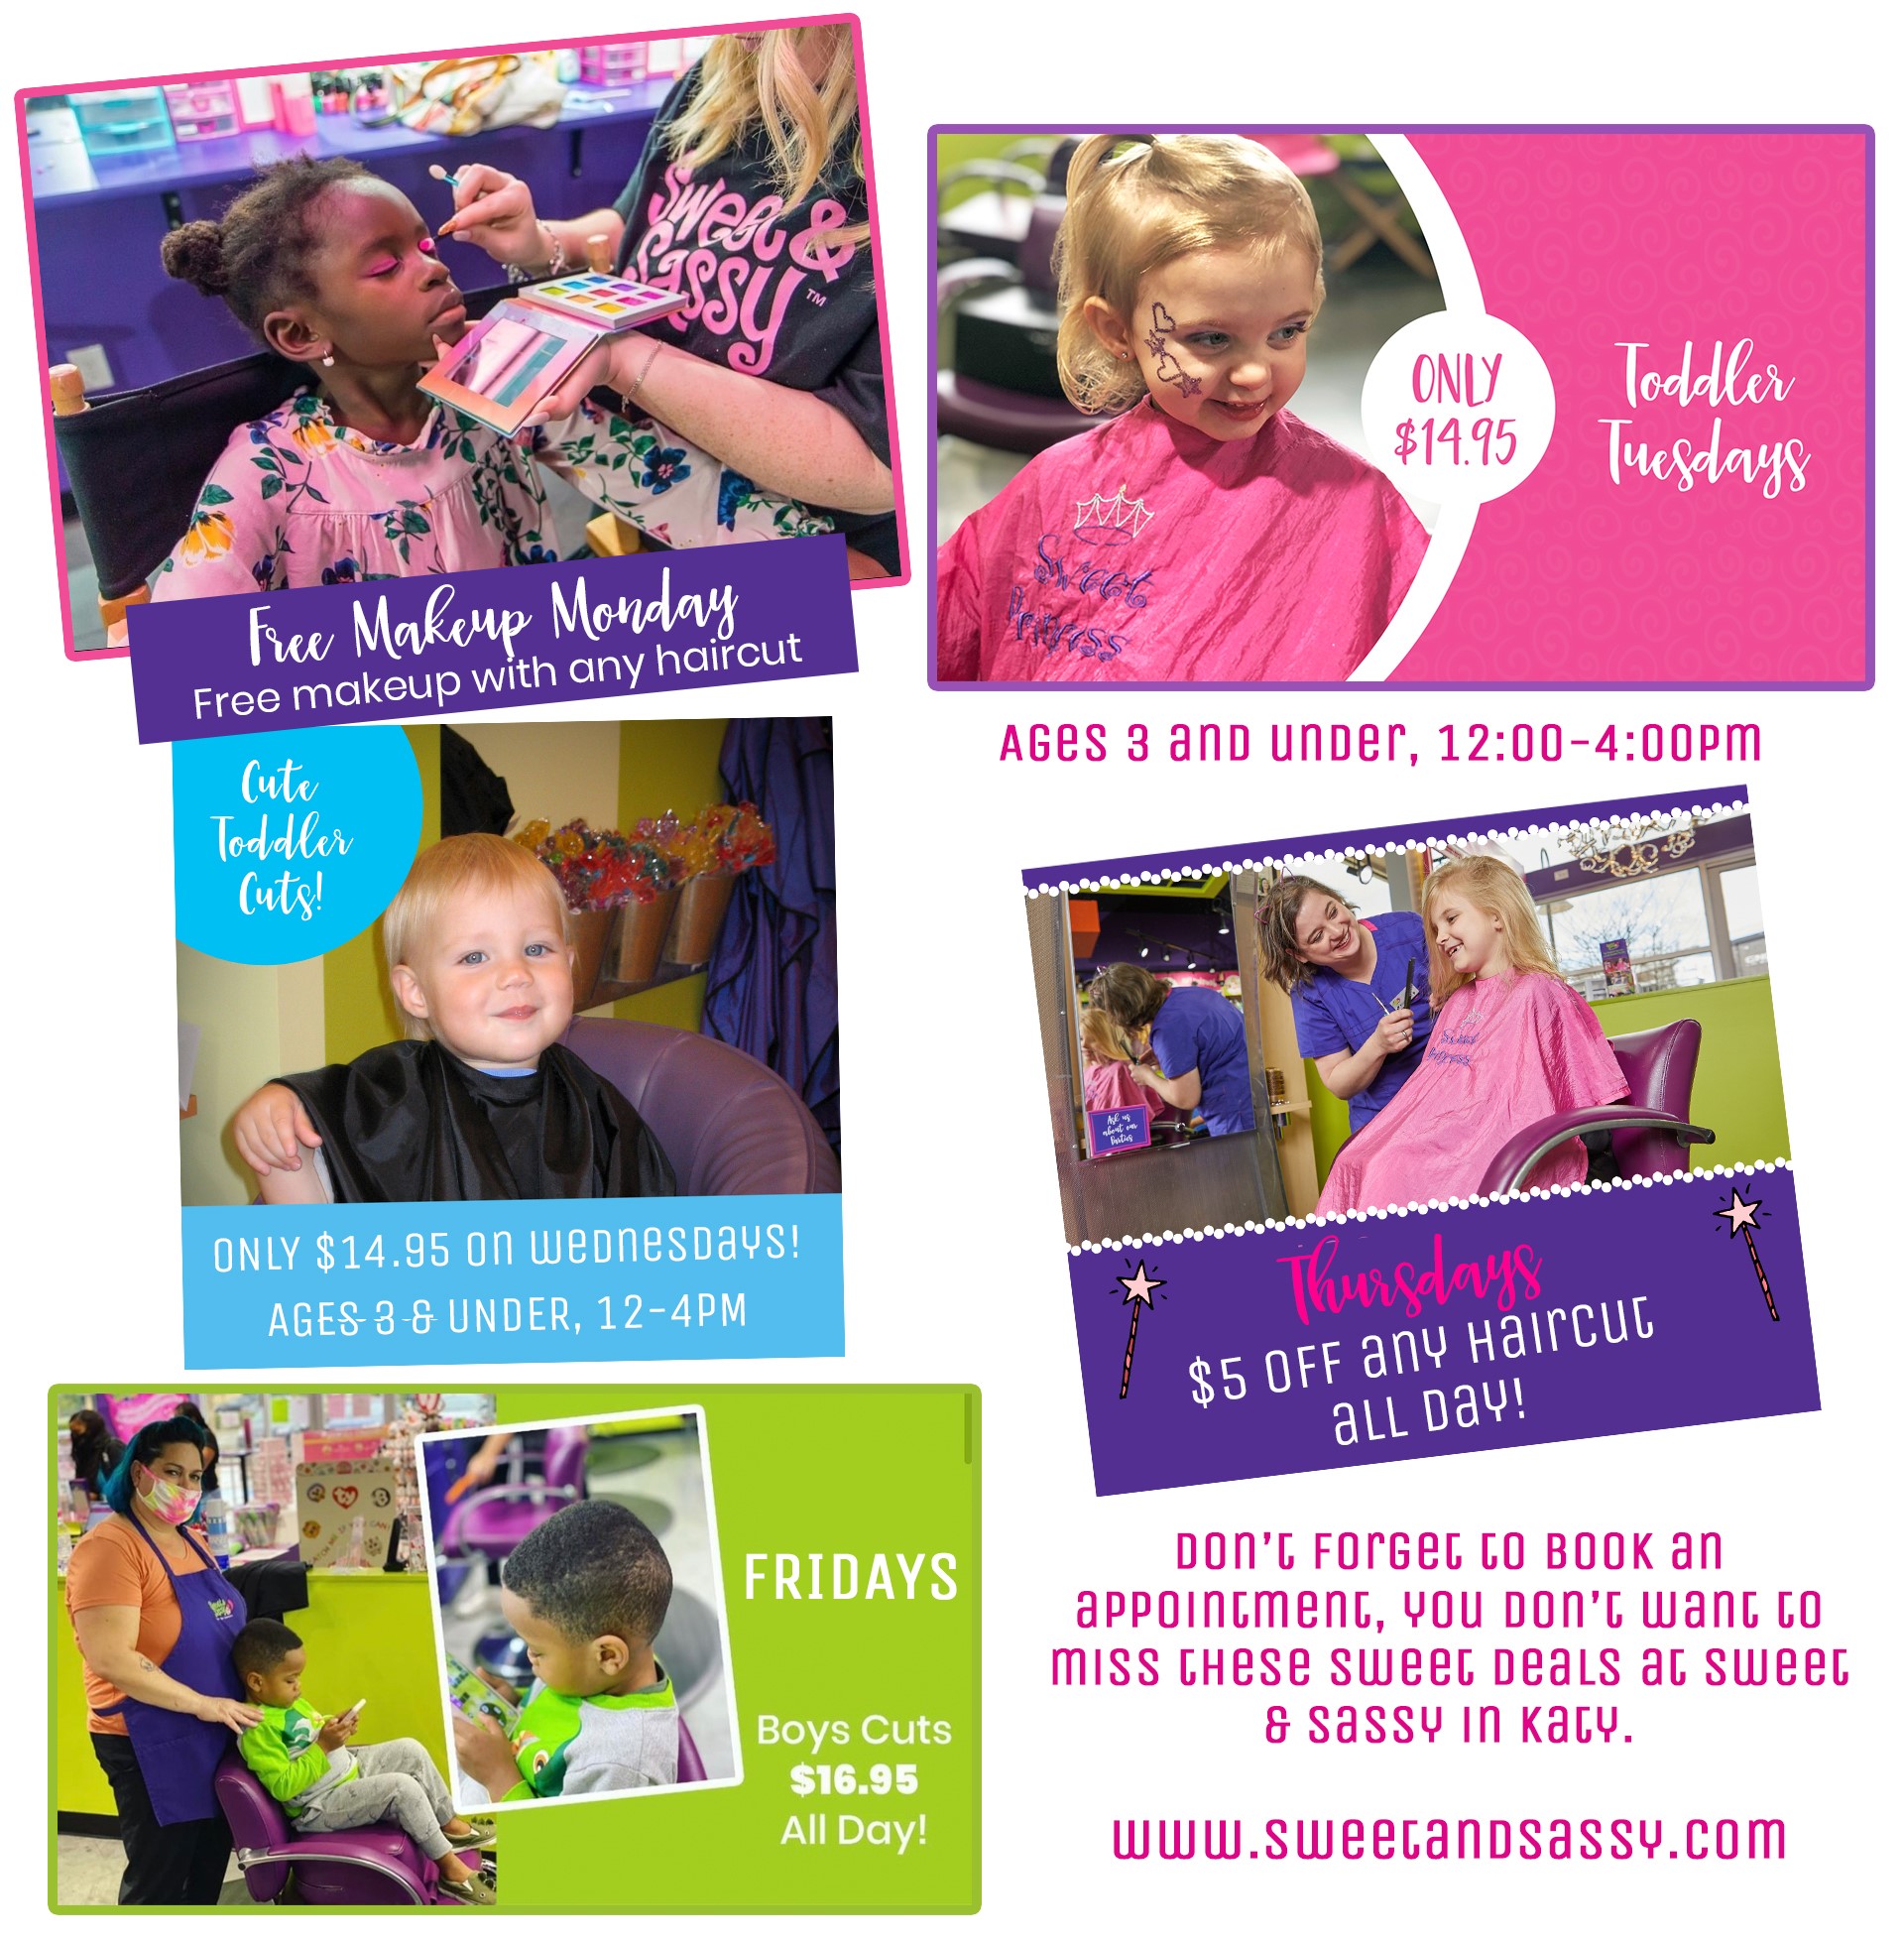 Current kids events at Sweet & Sassy of Katy